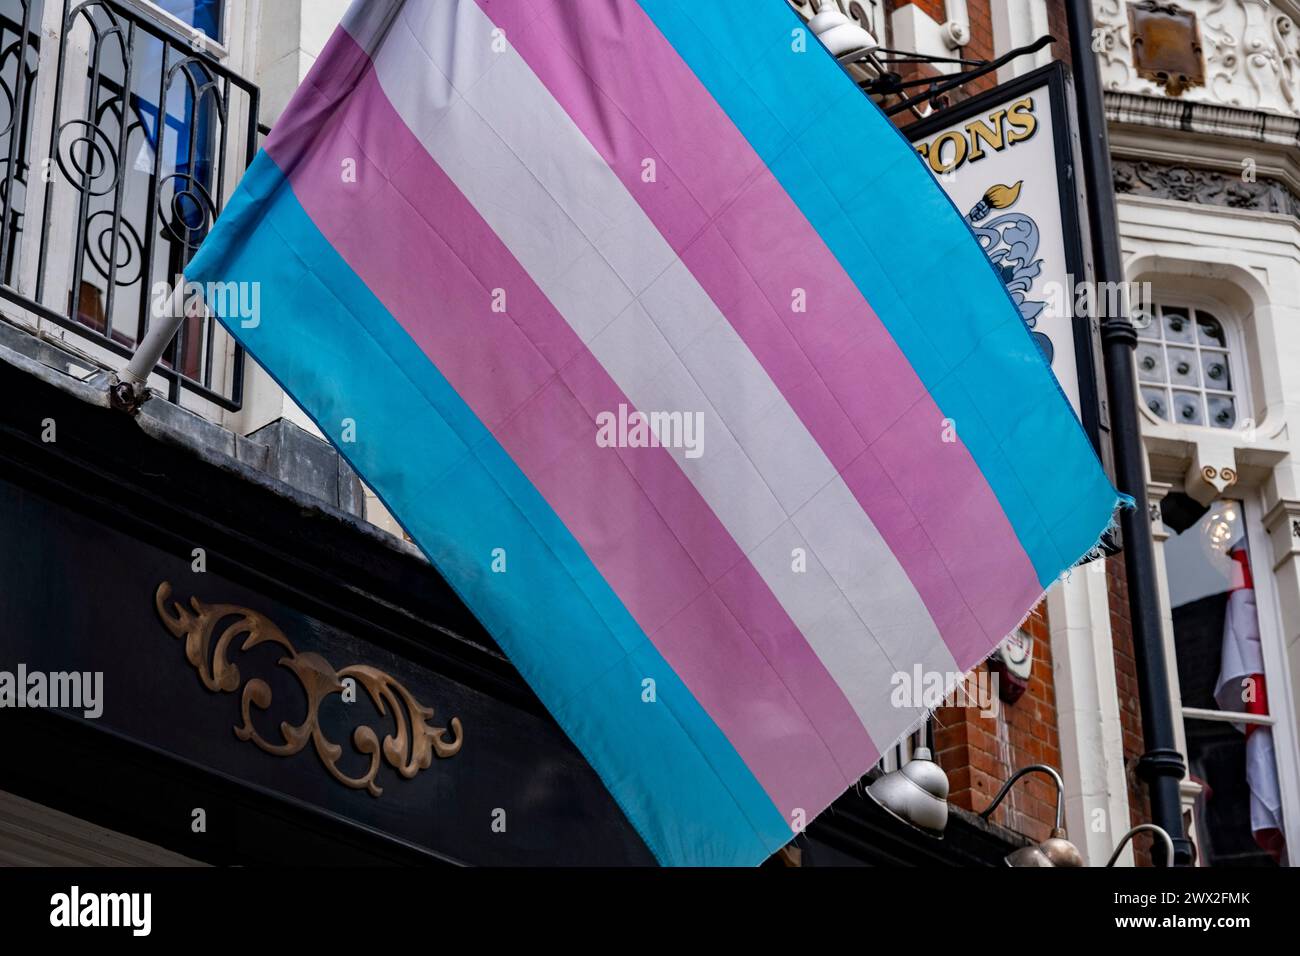 Transgender Pride flag in Soho on 6th March 2024 in London, United Kingdom. The transgender flag is a light blue, pink and white pentacolour pride flag representing the transgender community, organizations, and individuals. Stock Photo